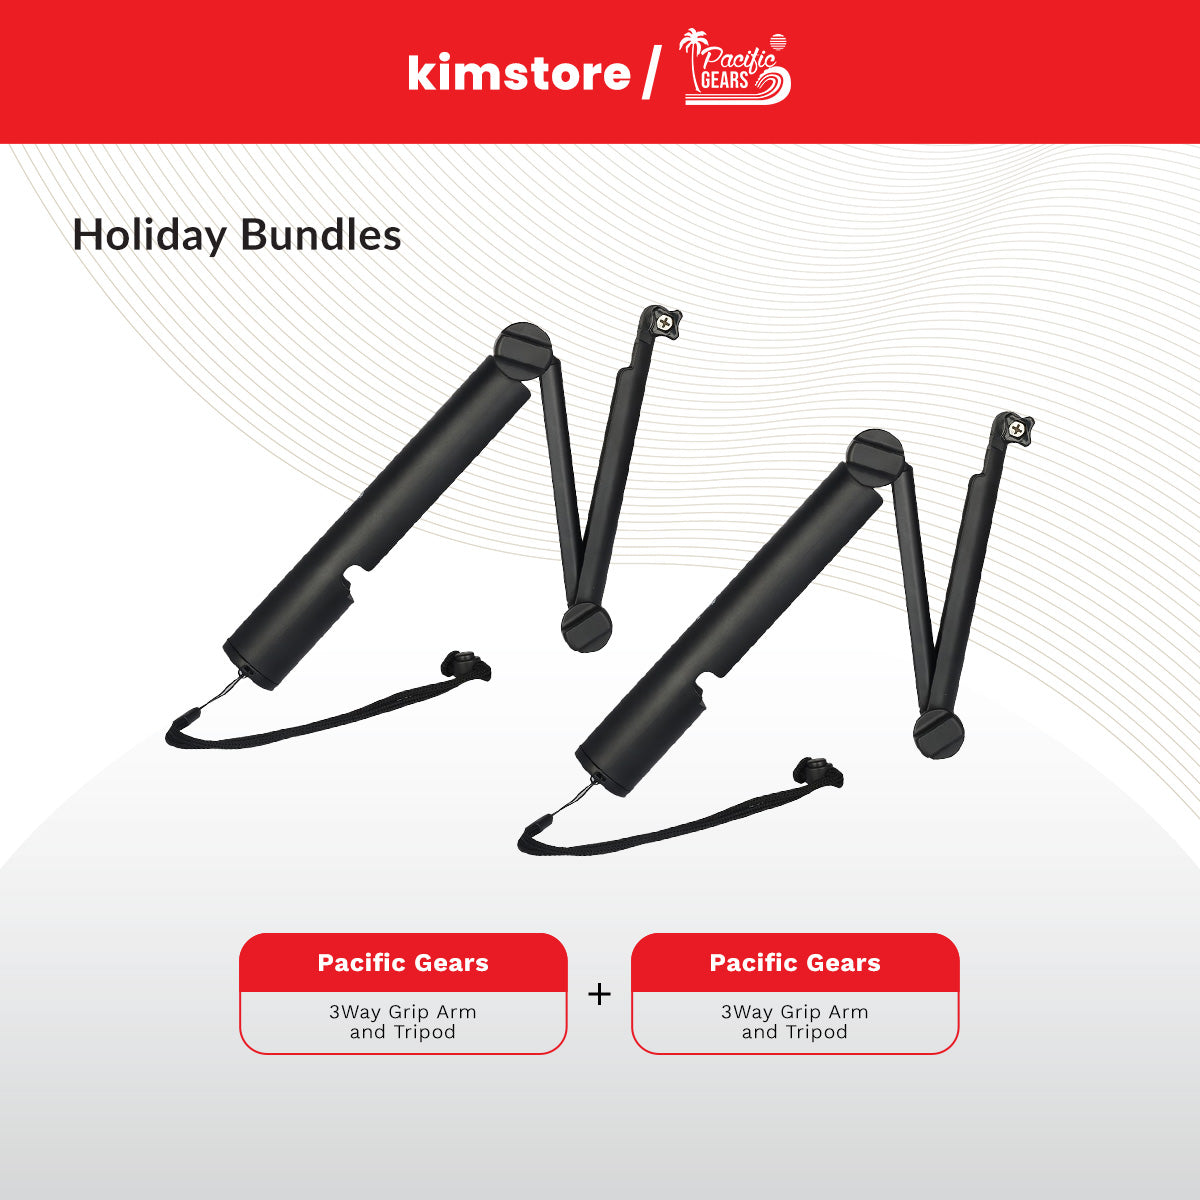 Holiday Bundle: Pacific Gears 3Way Grip Arm and Tripod (Black)